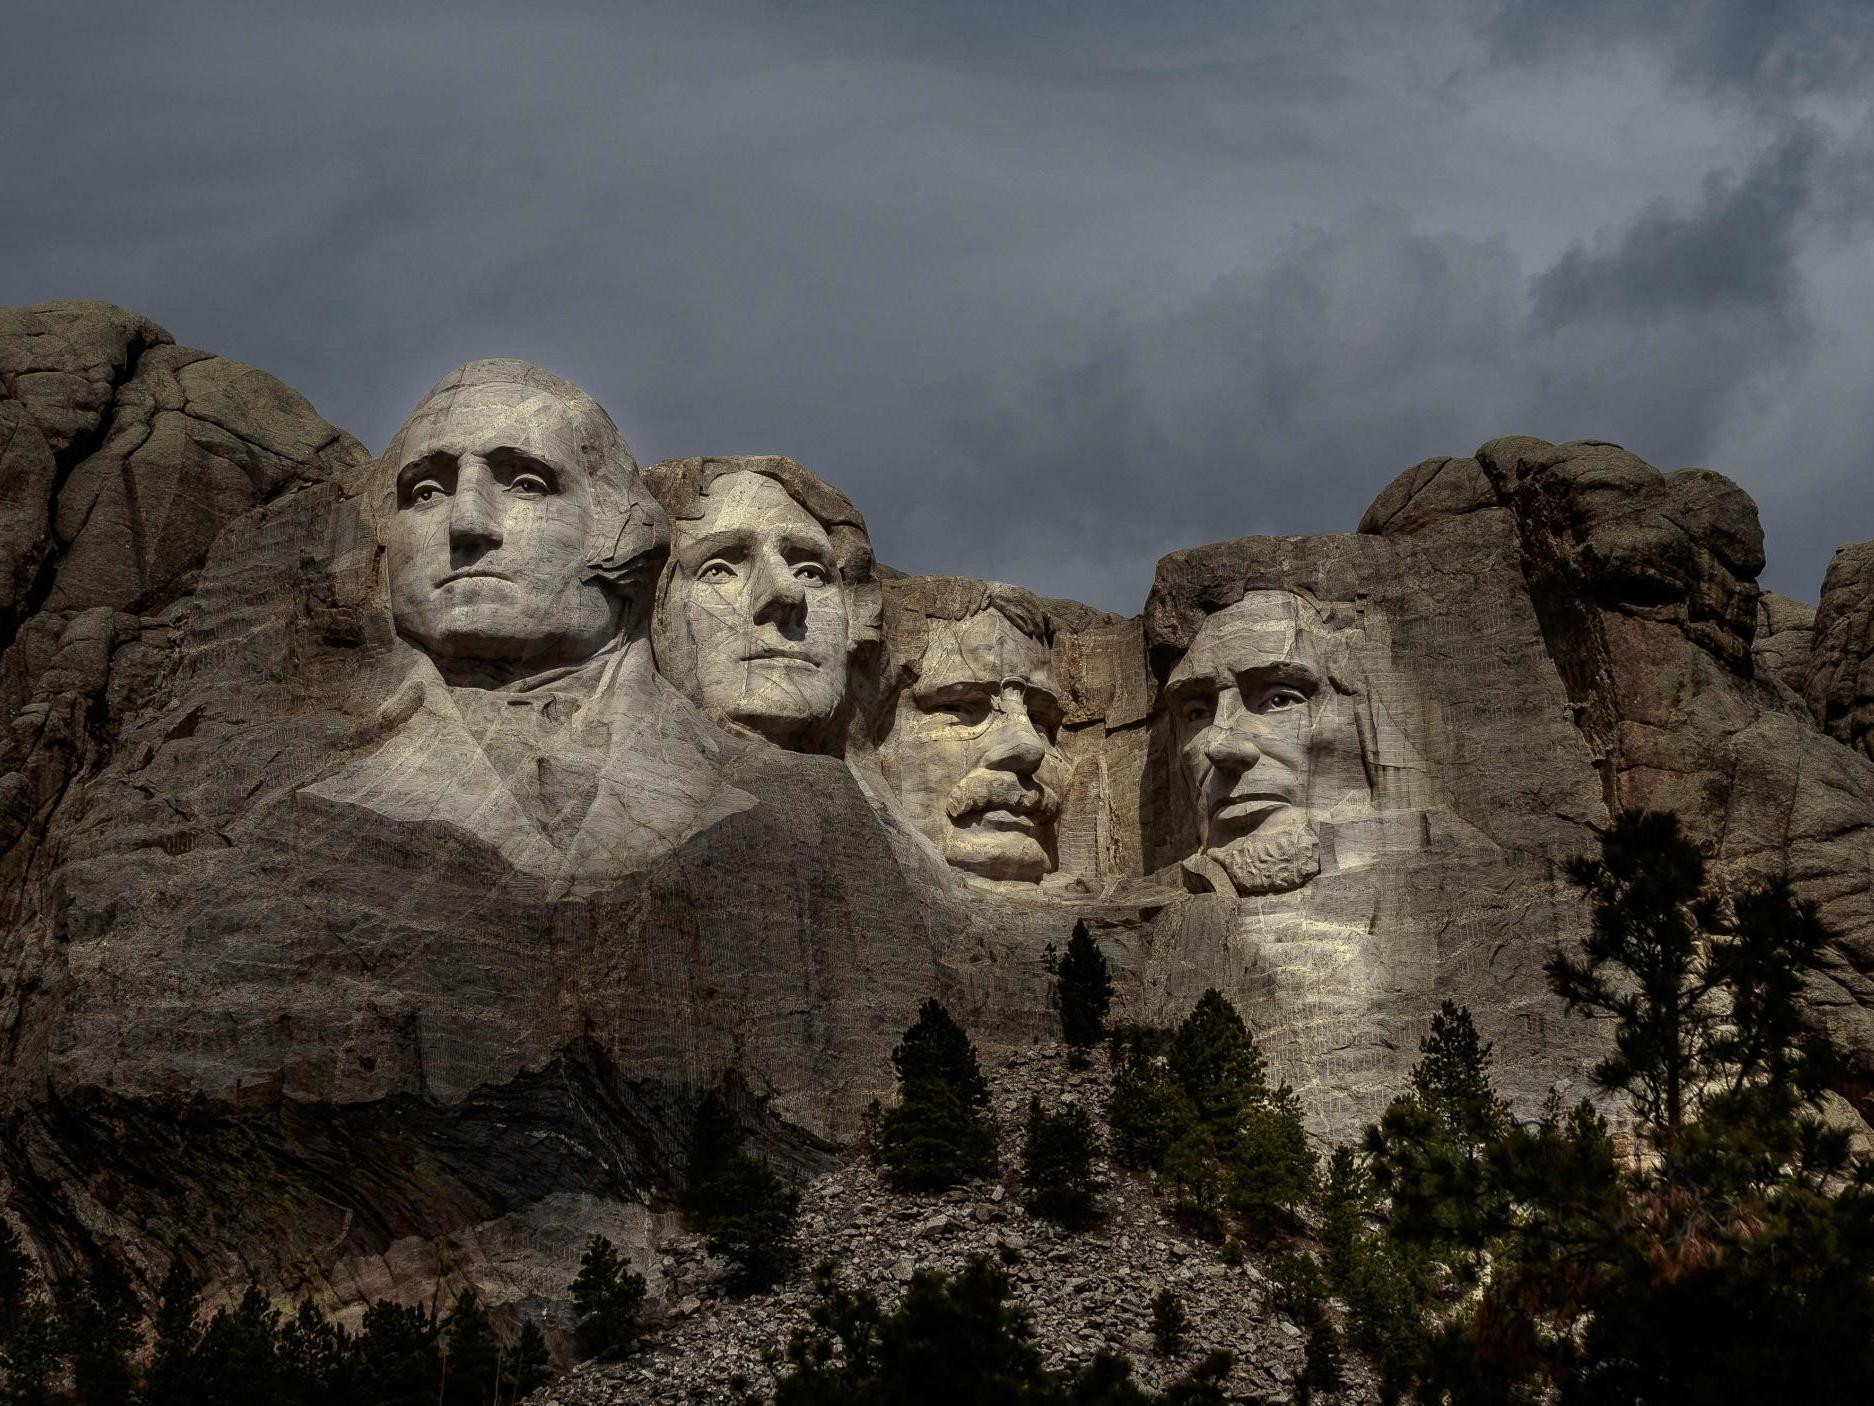 'It's going to cause an uproar': Sioux president says Trump not welcome to visit Mount Rushmore